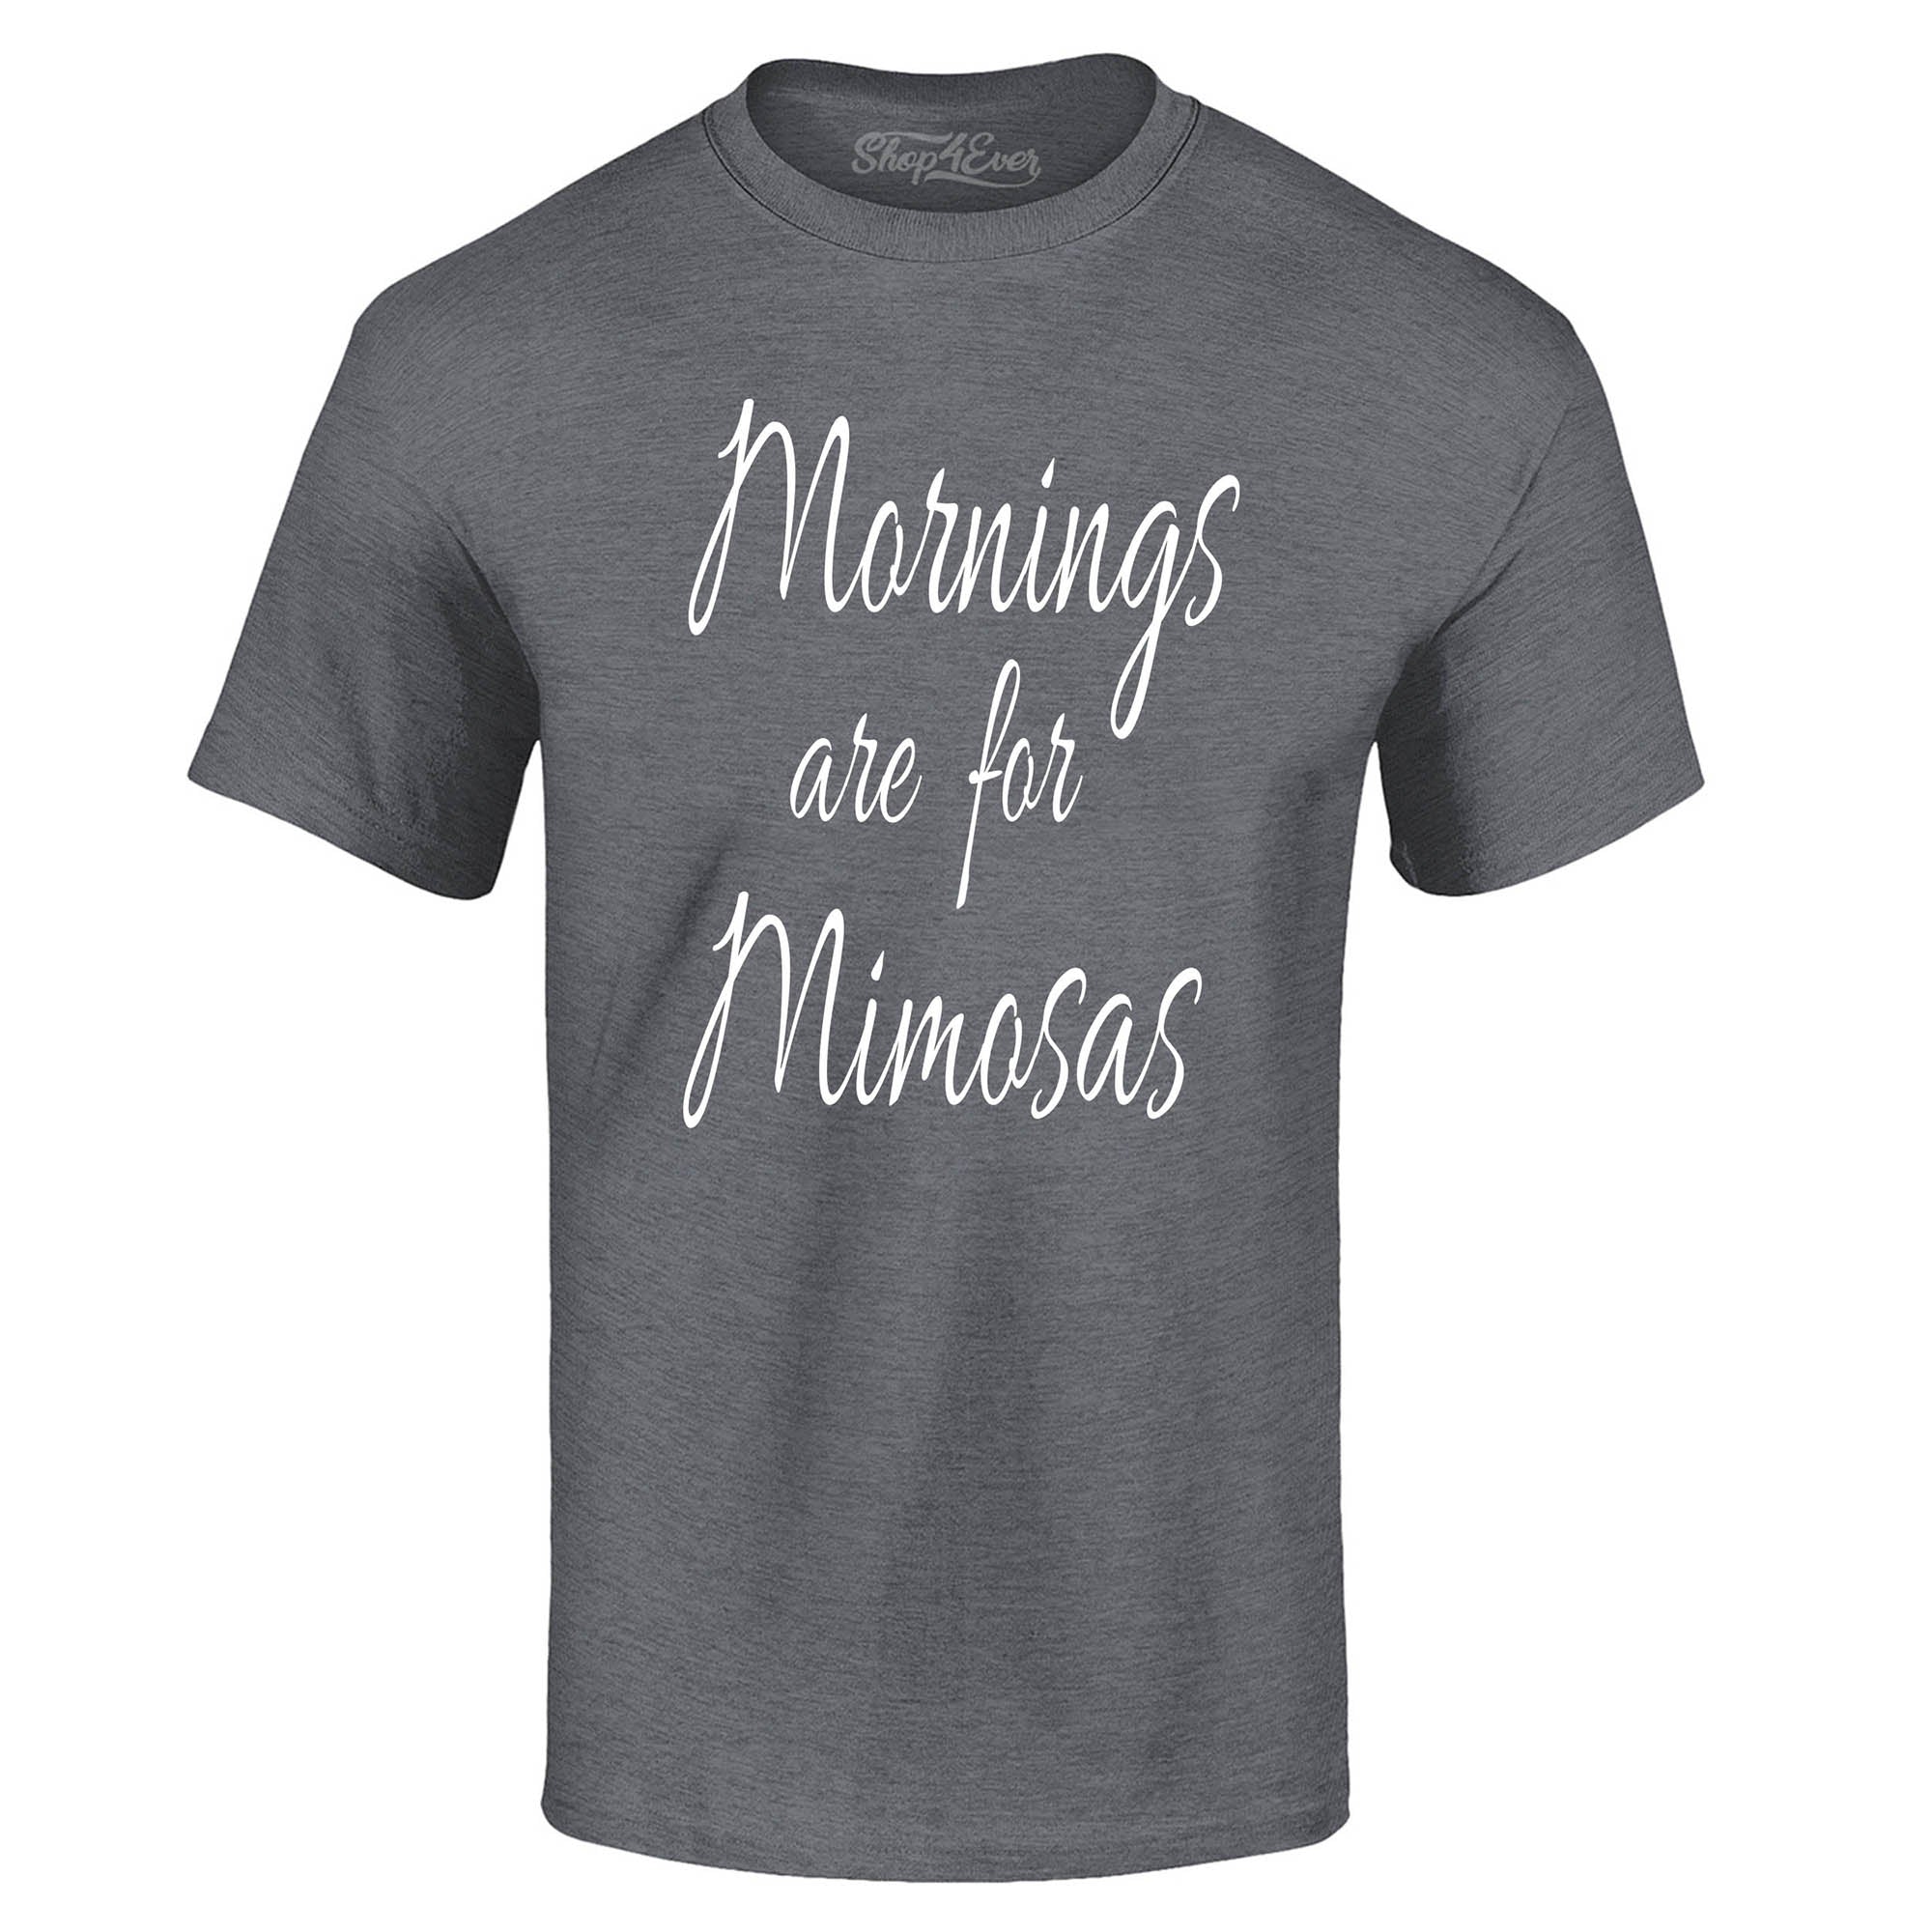 Mornings are for Mimosas T-Shirt Drinking Shirts